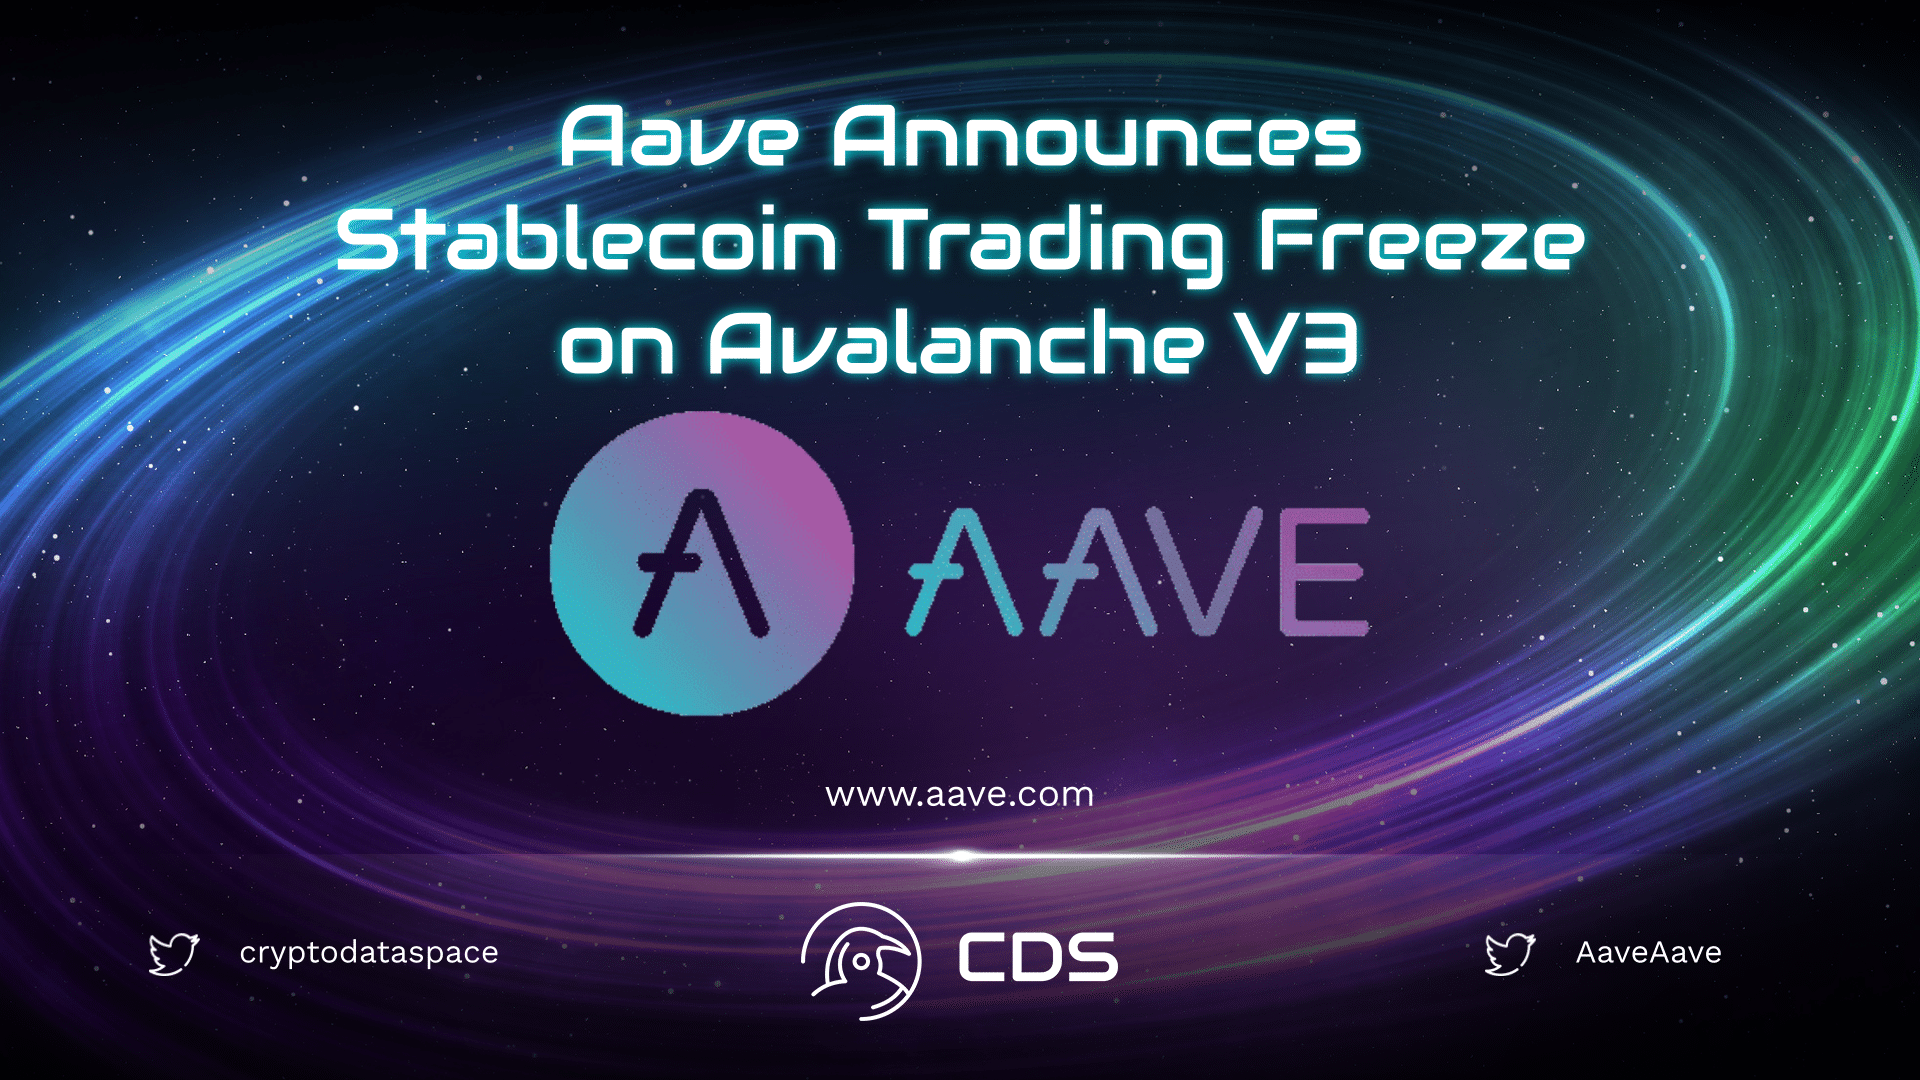 Aave Announces Stablecoin Trading Freeze on Avalanche V3